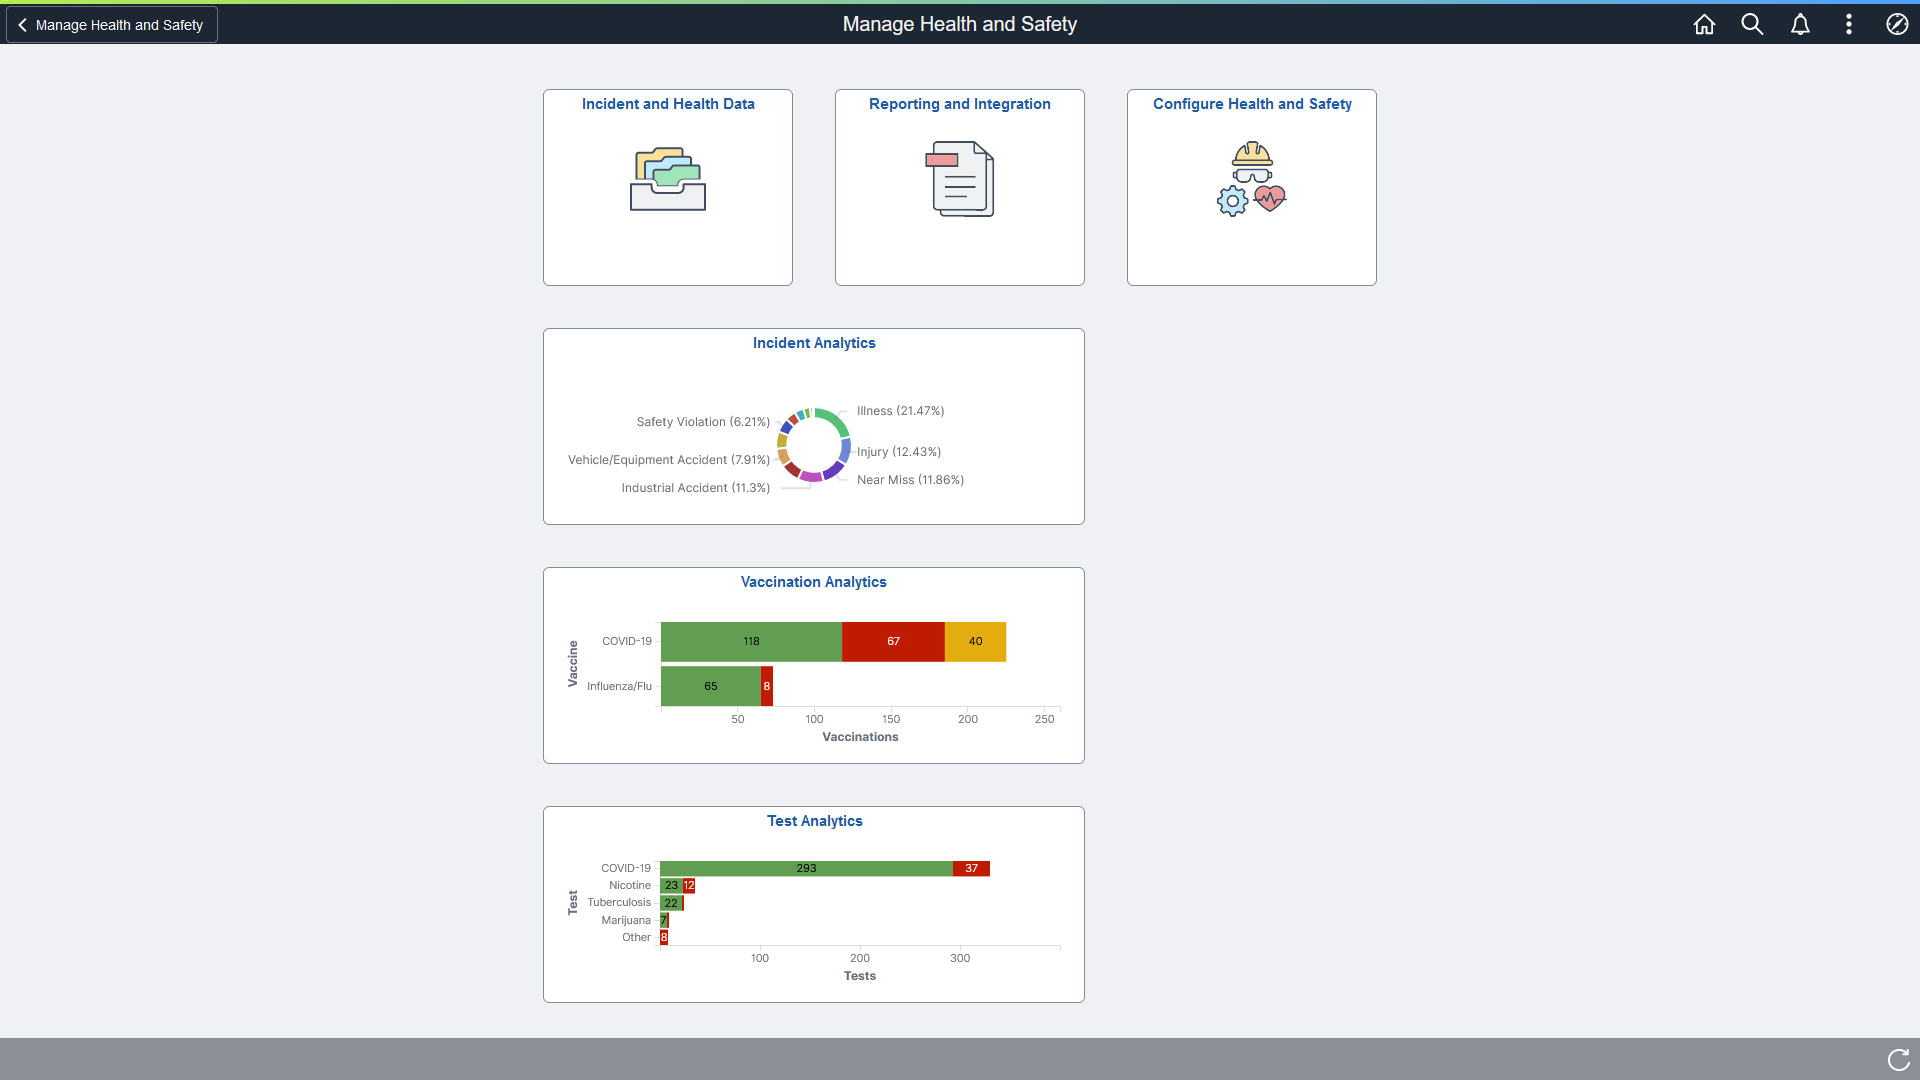 Manage Health and Safety dashboard